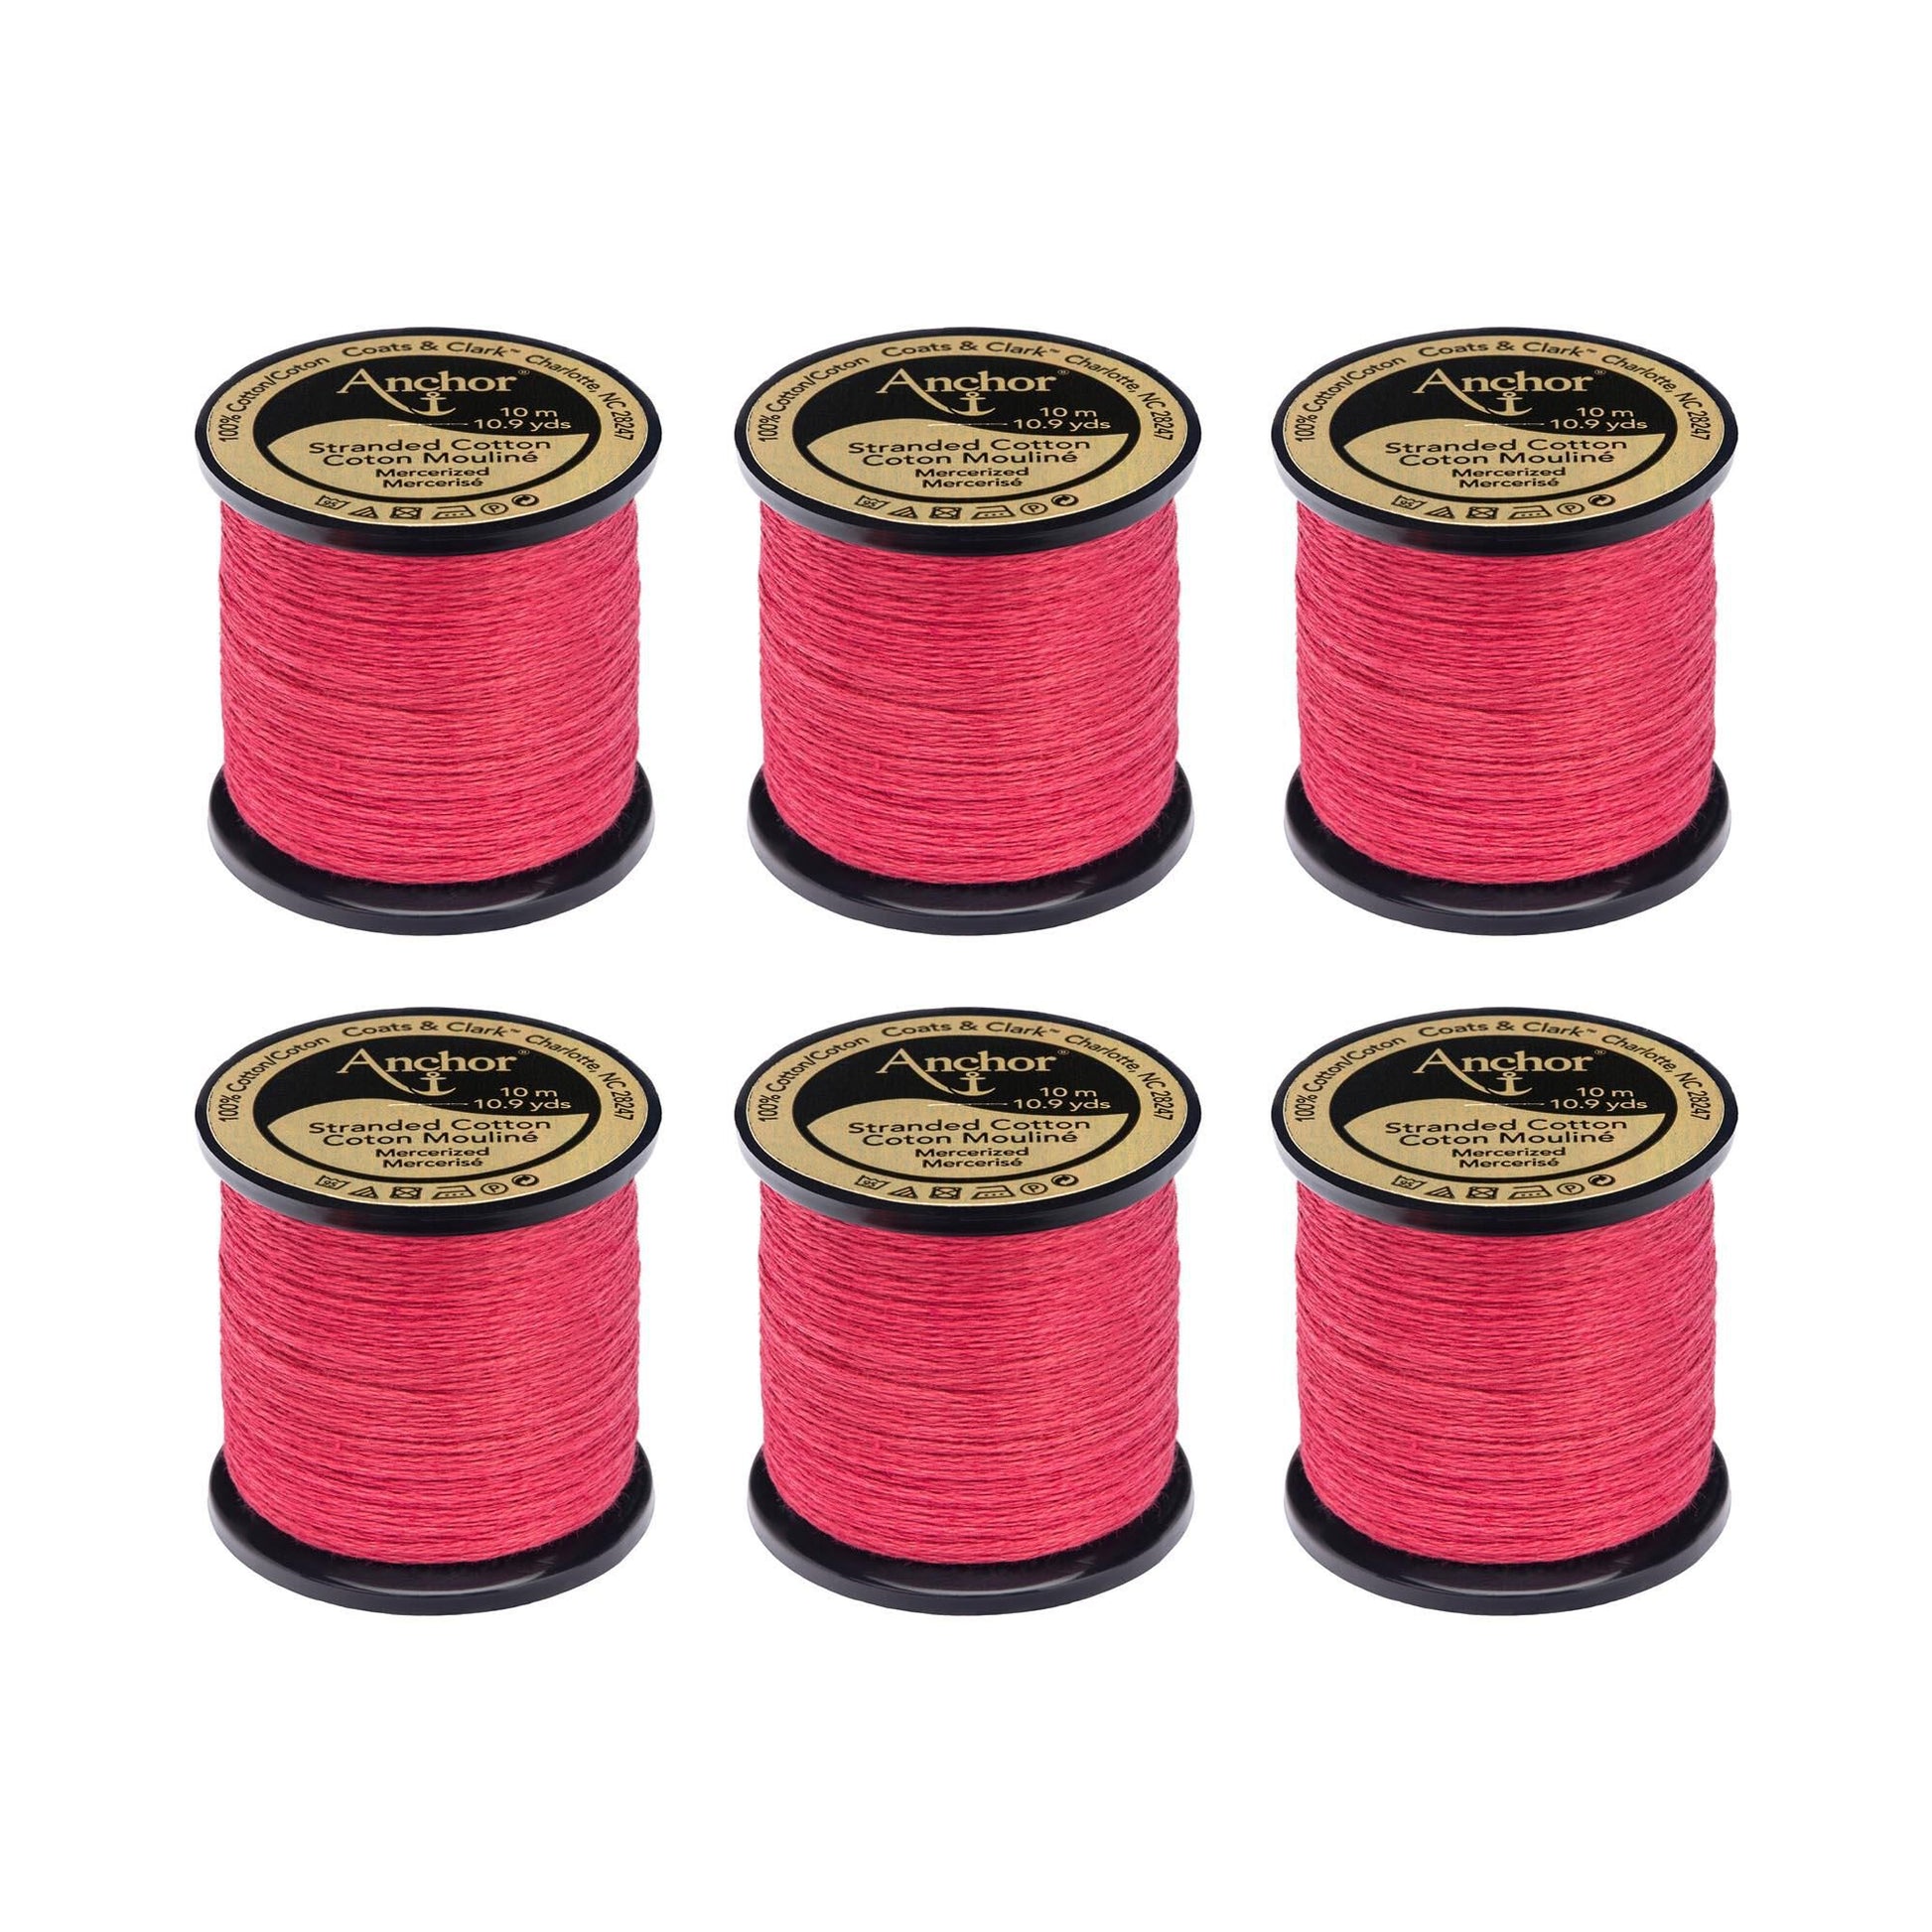 Anchor Spooled Floss 10 Meters (6 Pack) 0039 Blossom Pink Dark